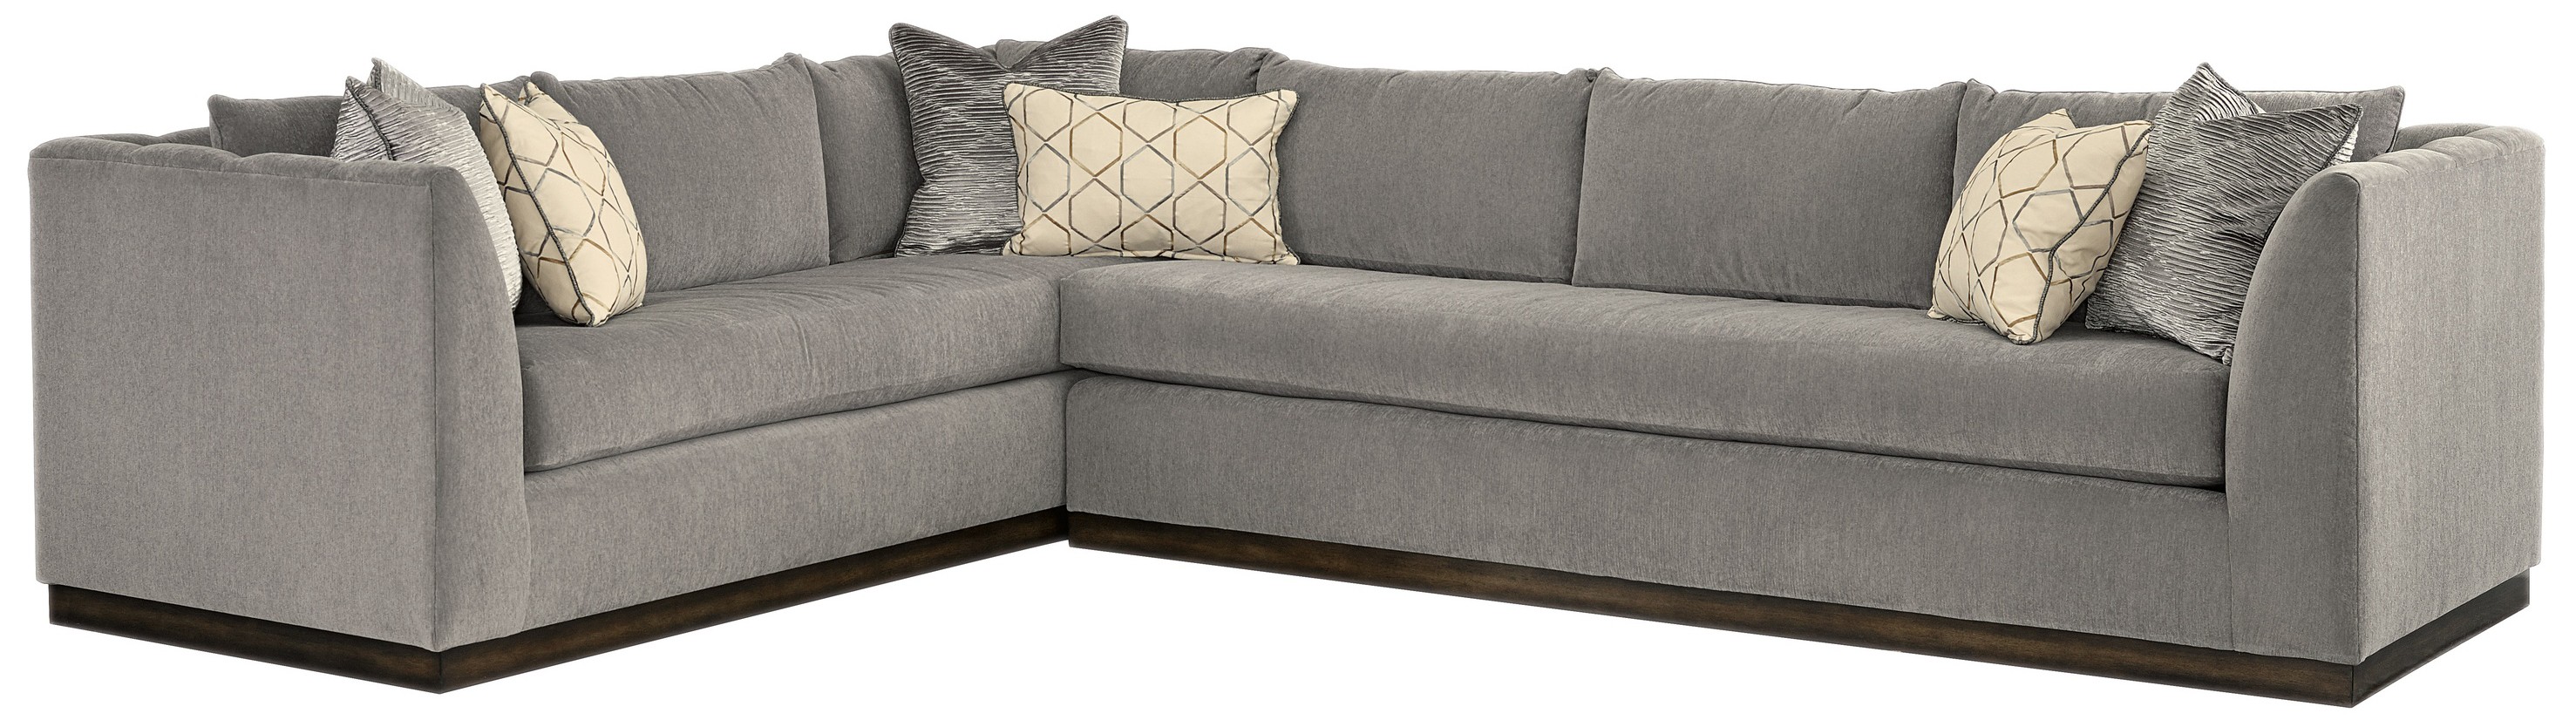 SECTIONALS - Leather & High End Upholstered Furniture Perfectly modern sectional sofa